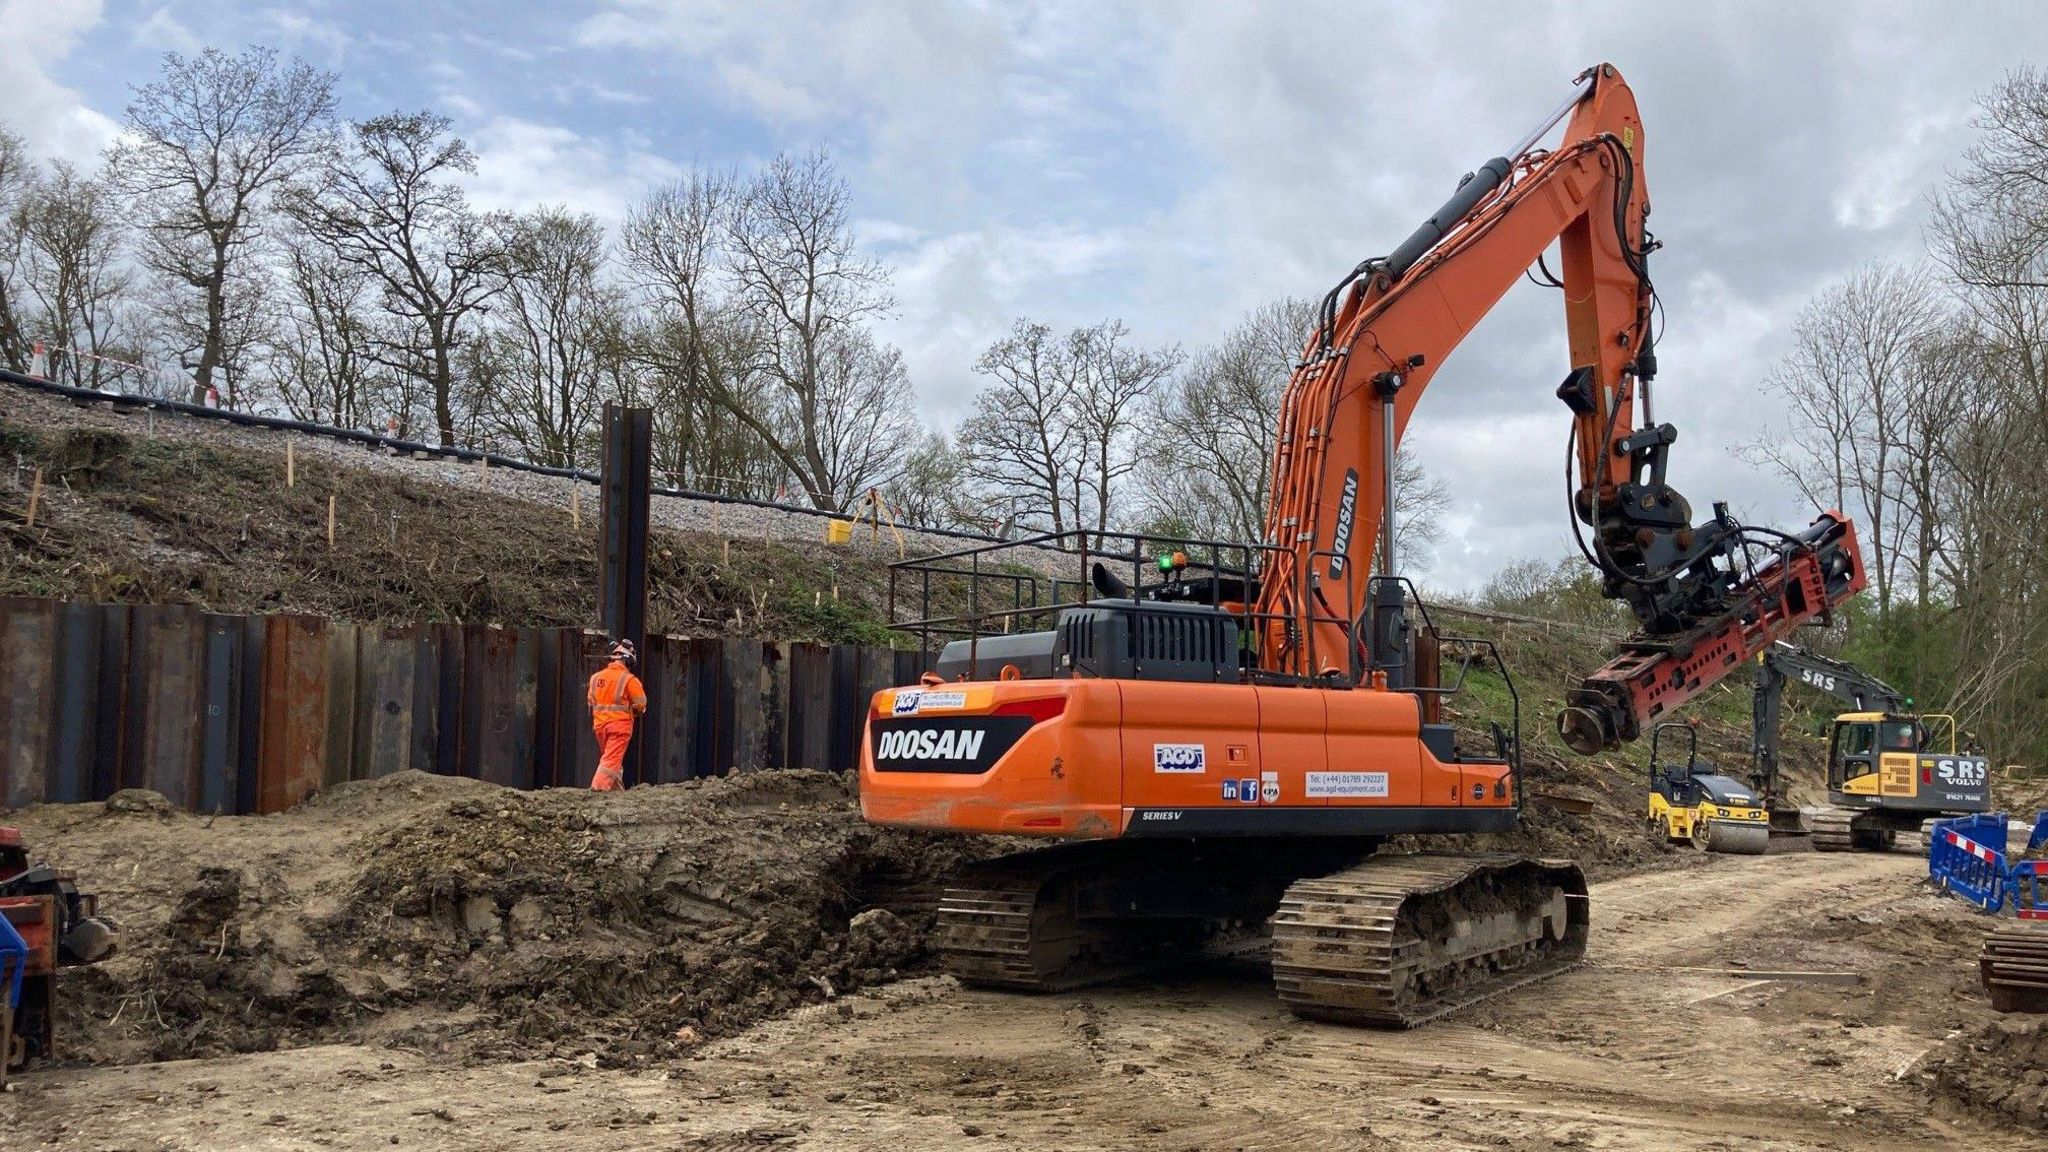 A crane installing steel piles to stabilise the Bough Beech embankment